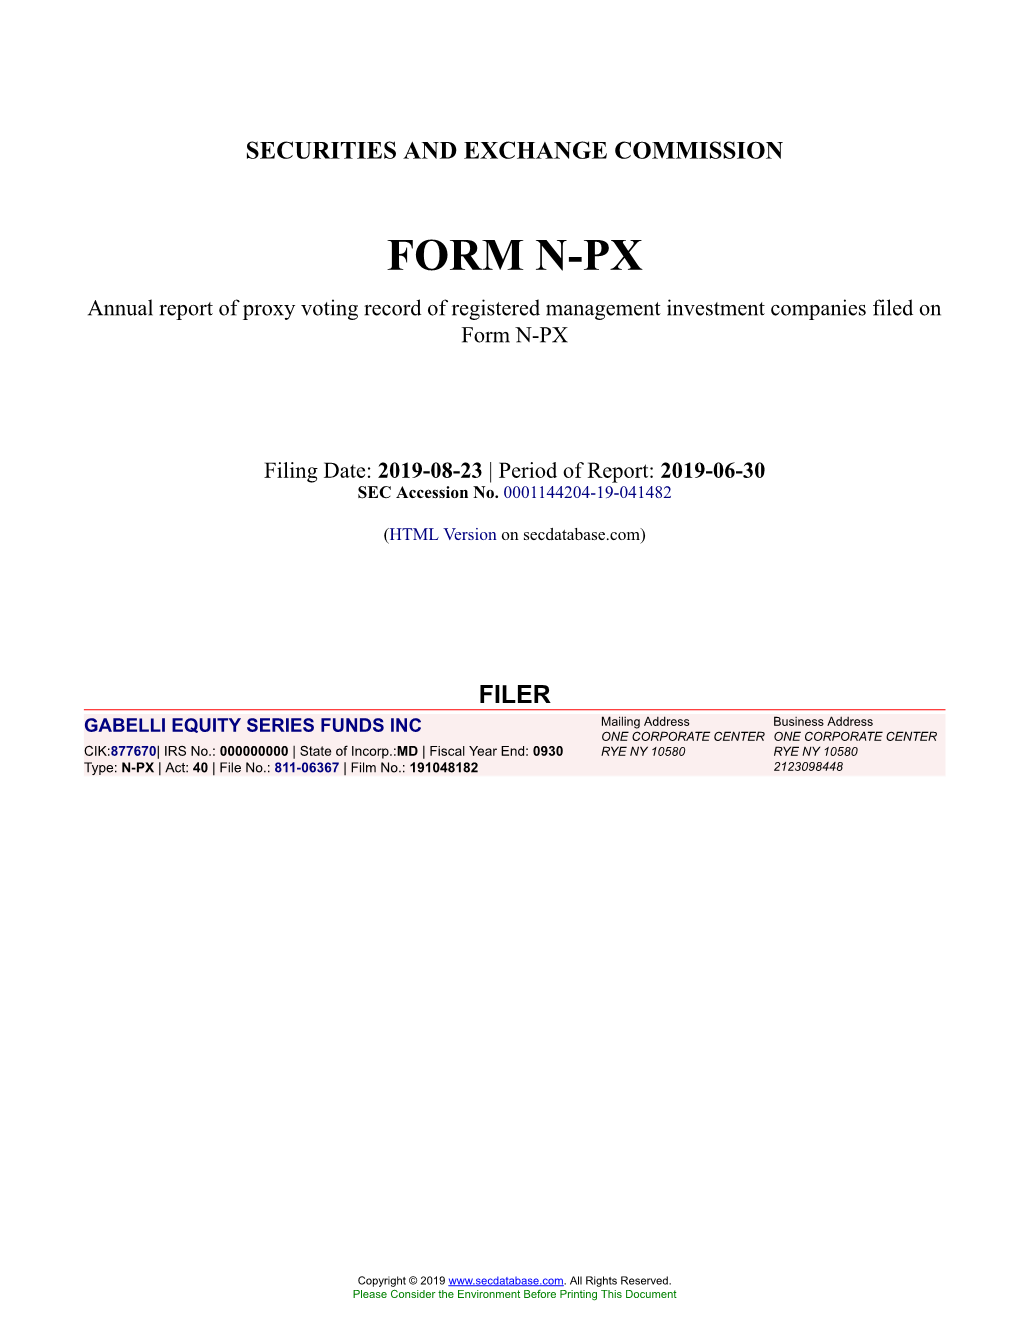 GABELLI EQUITY SERIES FUNDS INC Form N-PX Filed 2019-08-23